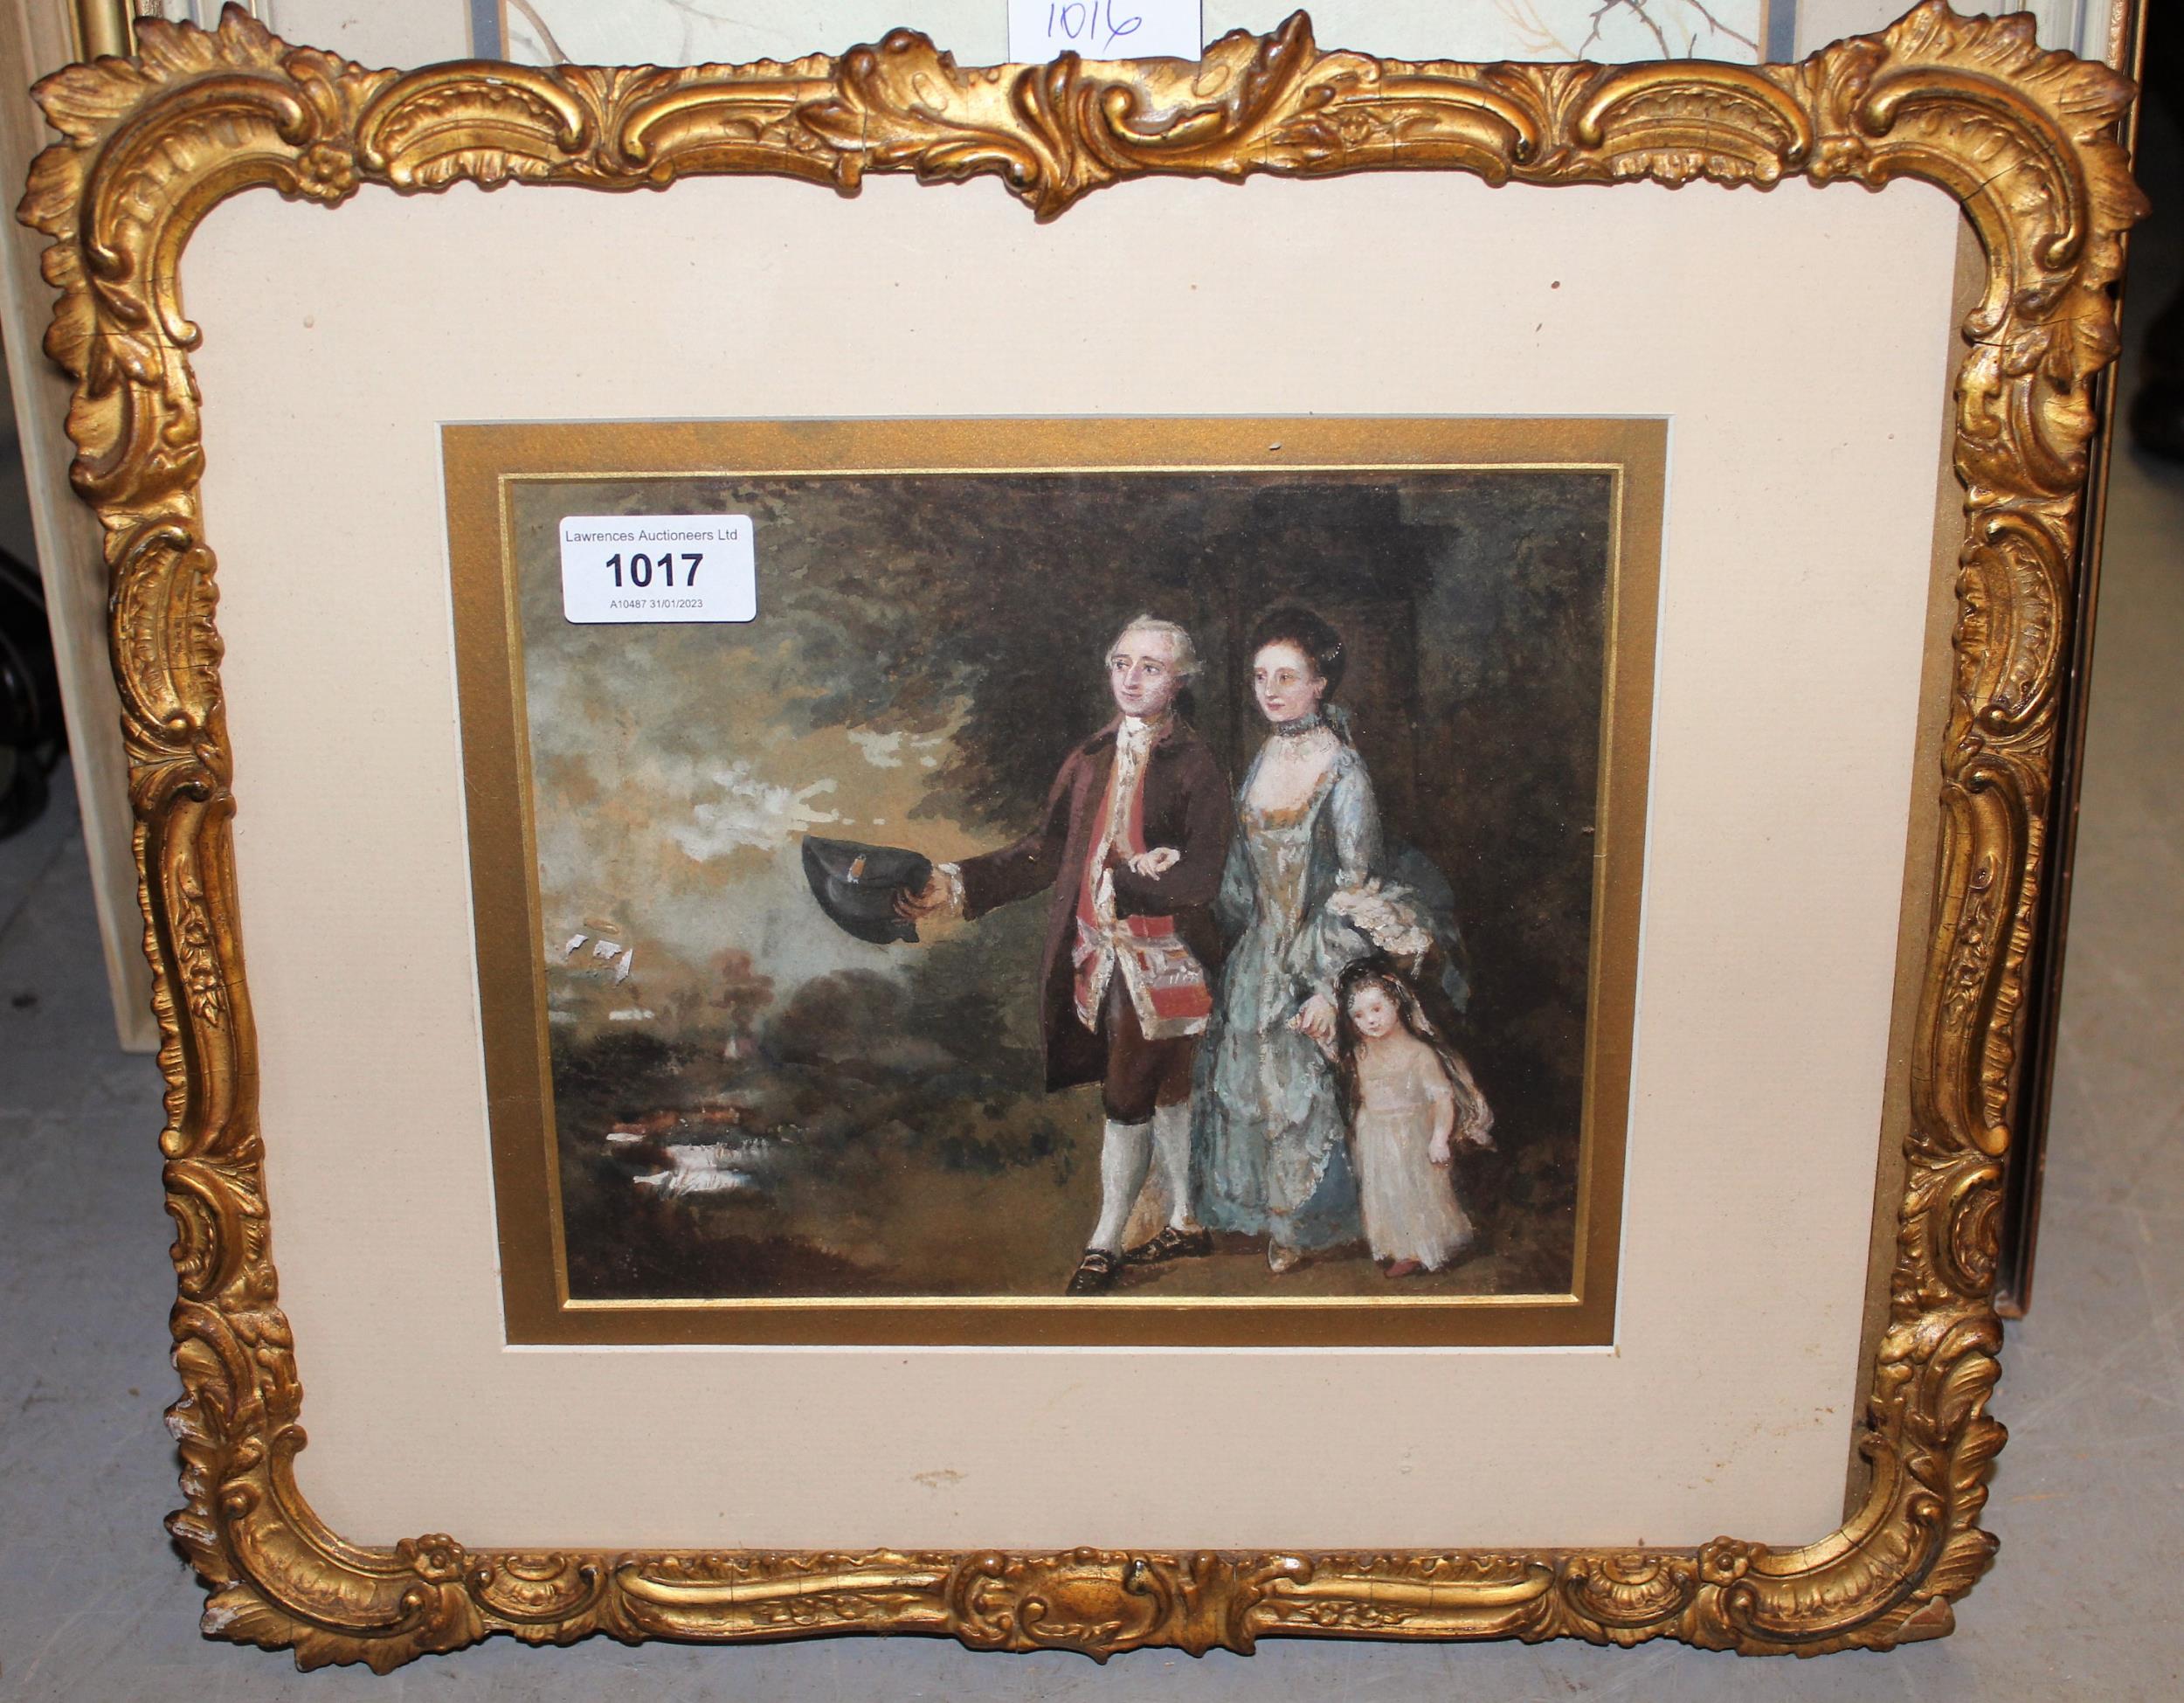 Small mixed media study, group of three figures in 18th Century costume, 17cms x 21cms, gilt framed, - Image 2 of 4